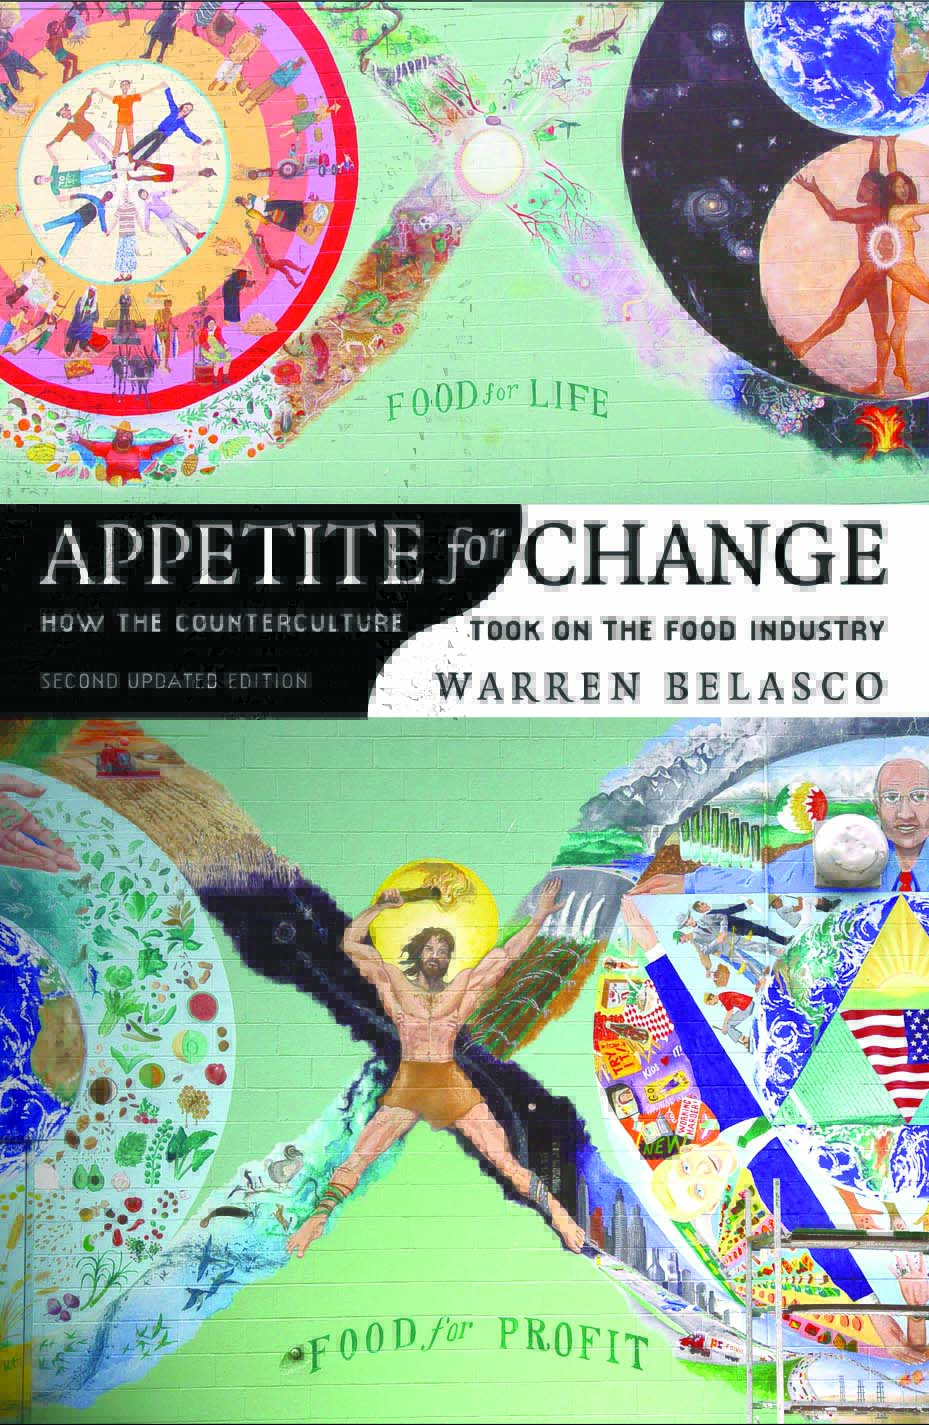 Appetite for change book cover